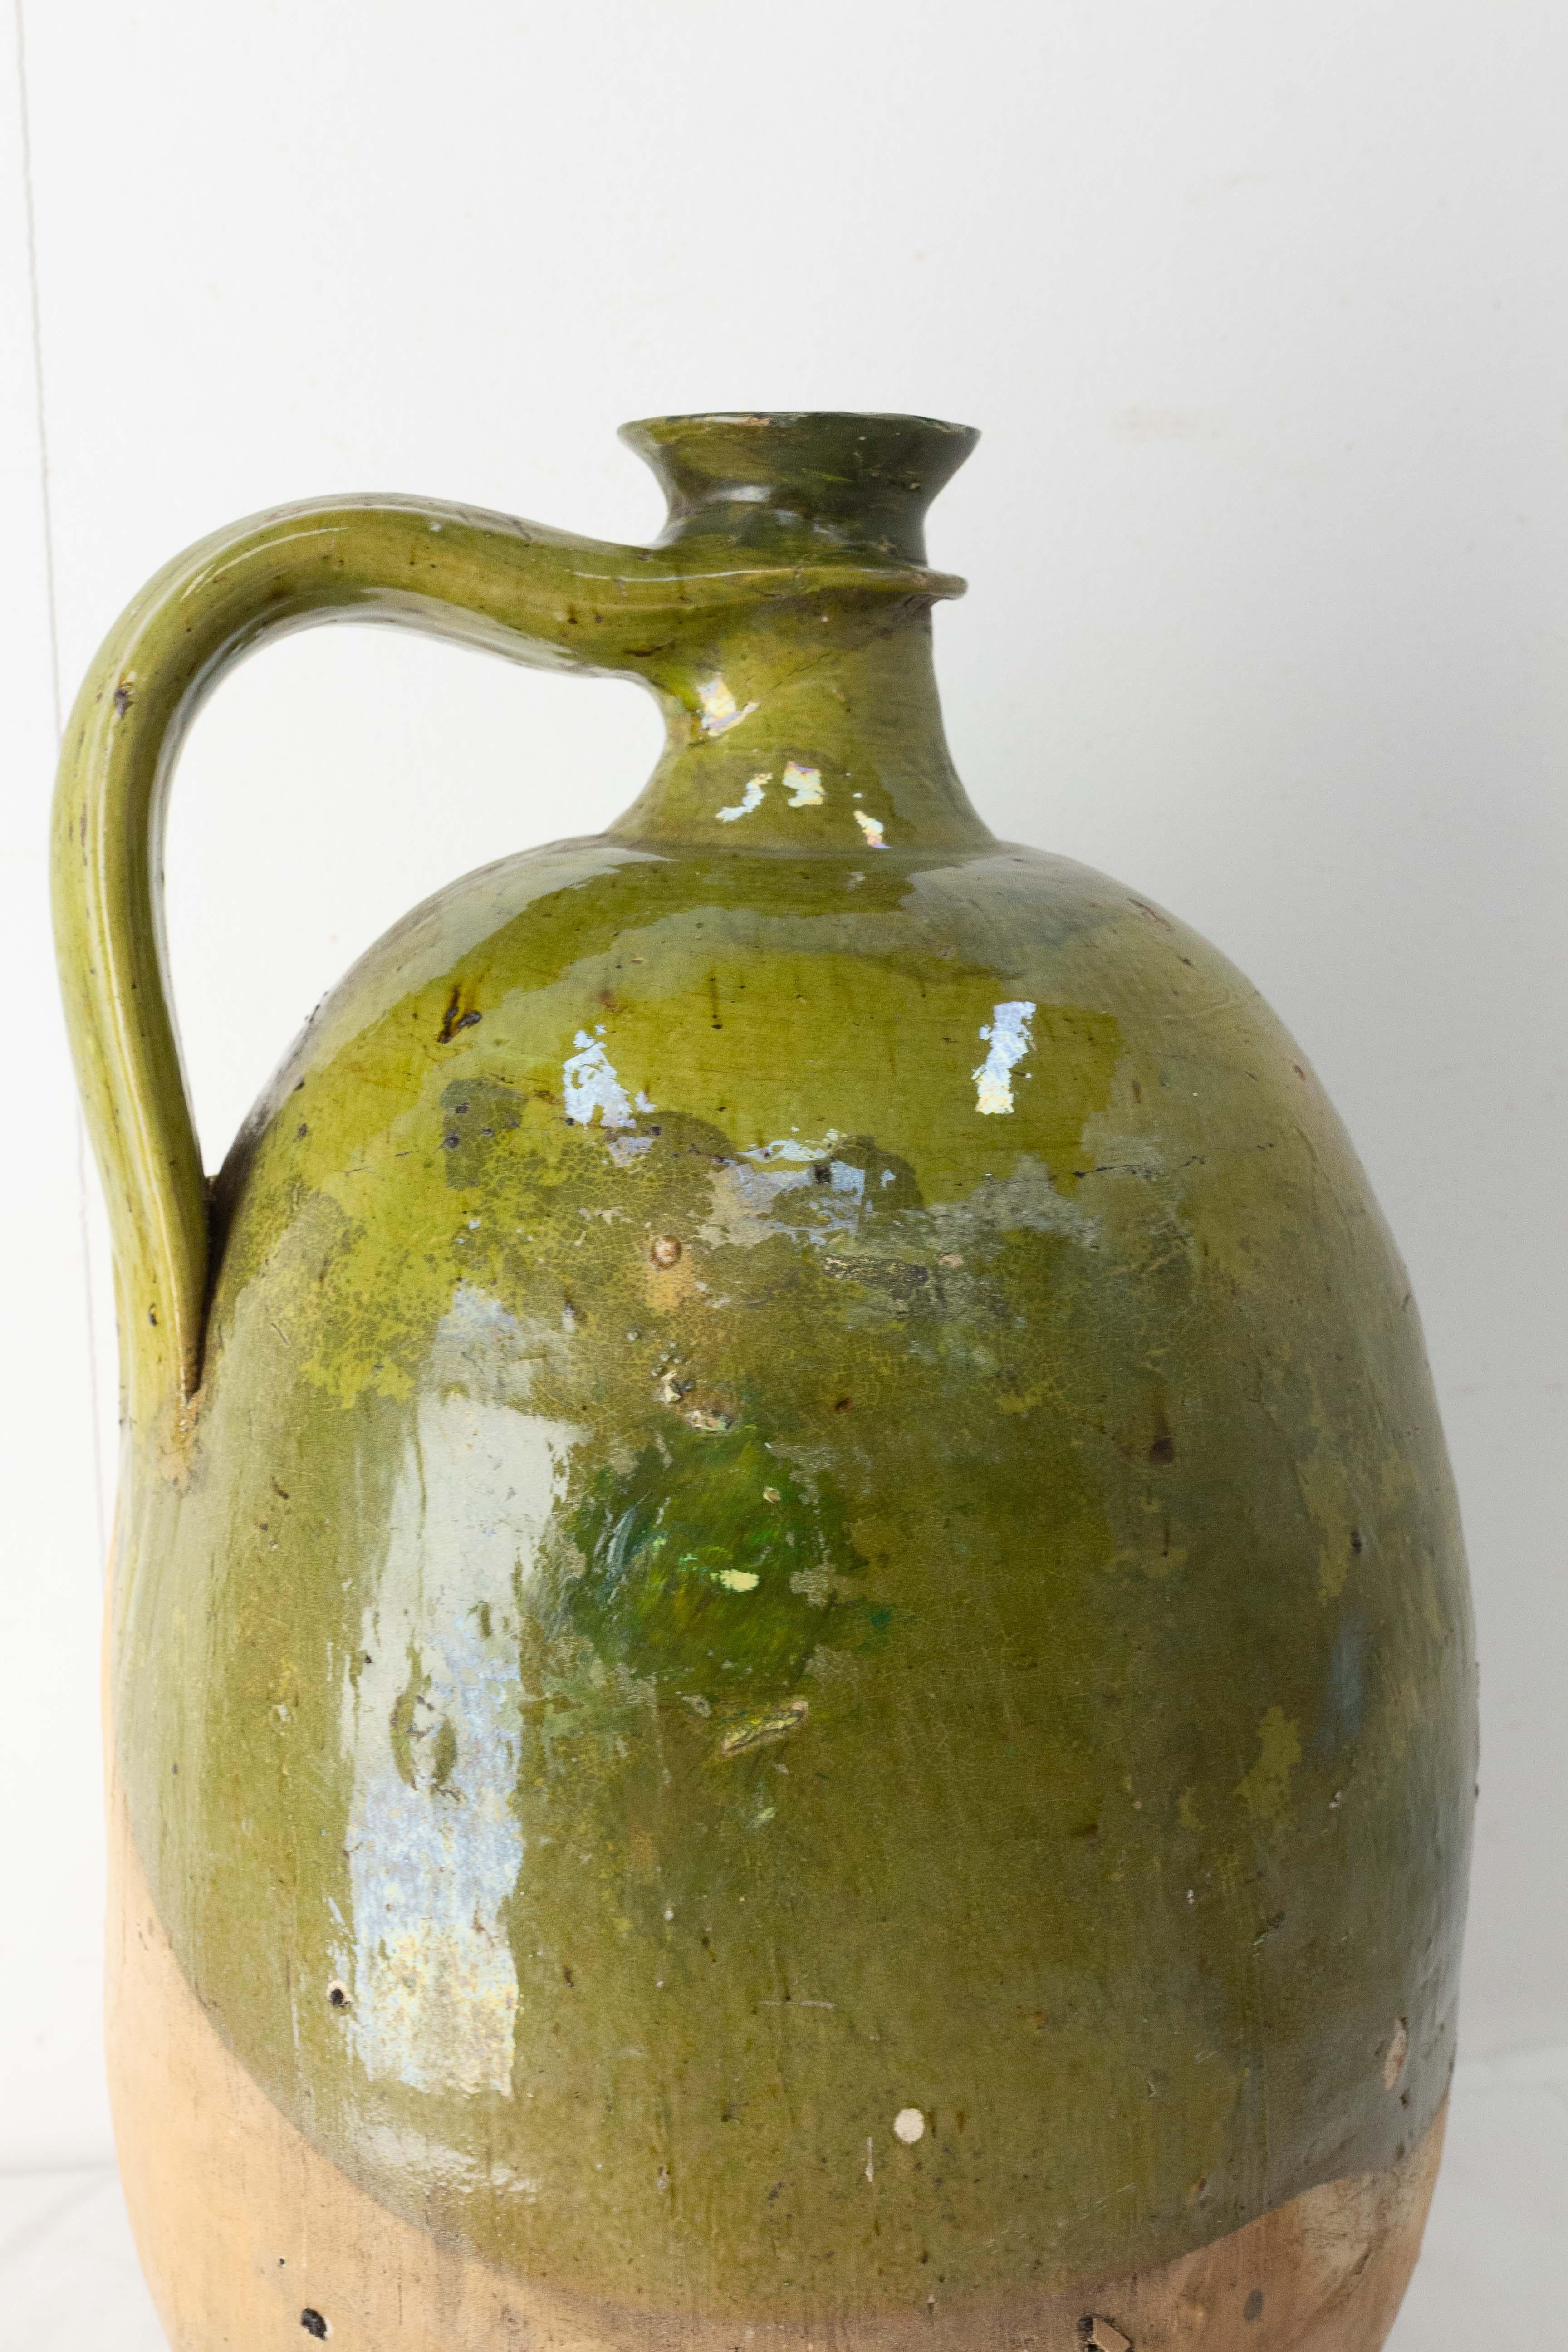 South of France Provencal Oil Jar Terracotta with Green Glaze, 19th Century For Sale 1